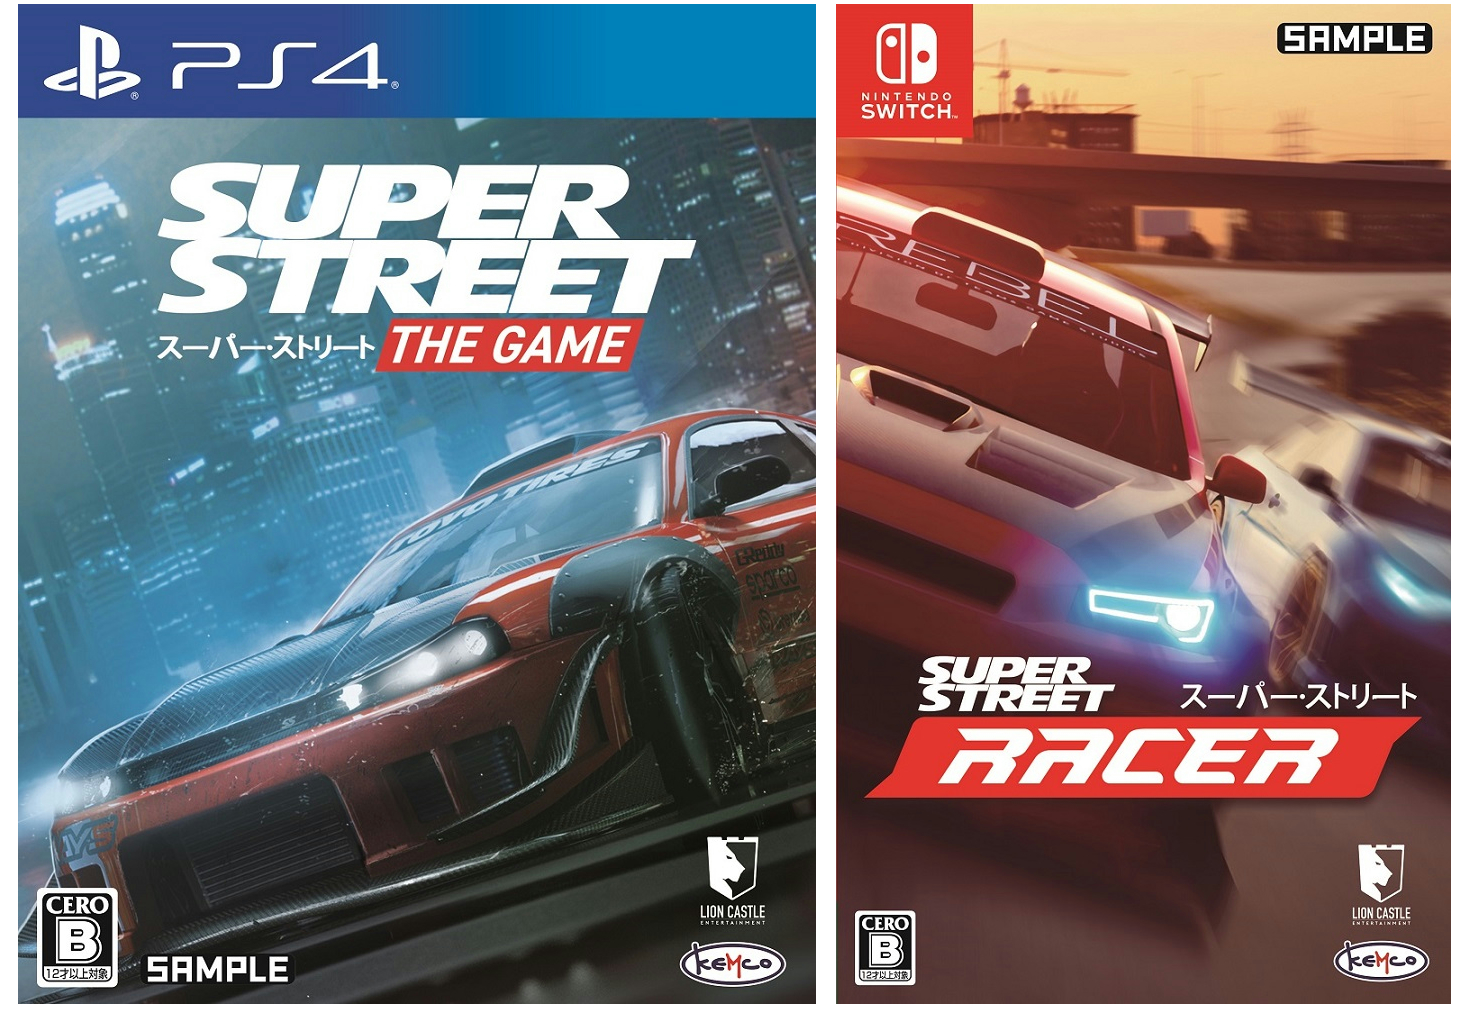 Ps4 スーパー ストリート The Game とswitch スーパー ストリート Racer の発売日が19年11月14日に決定 3d公道レースゲーム